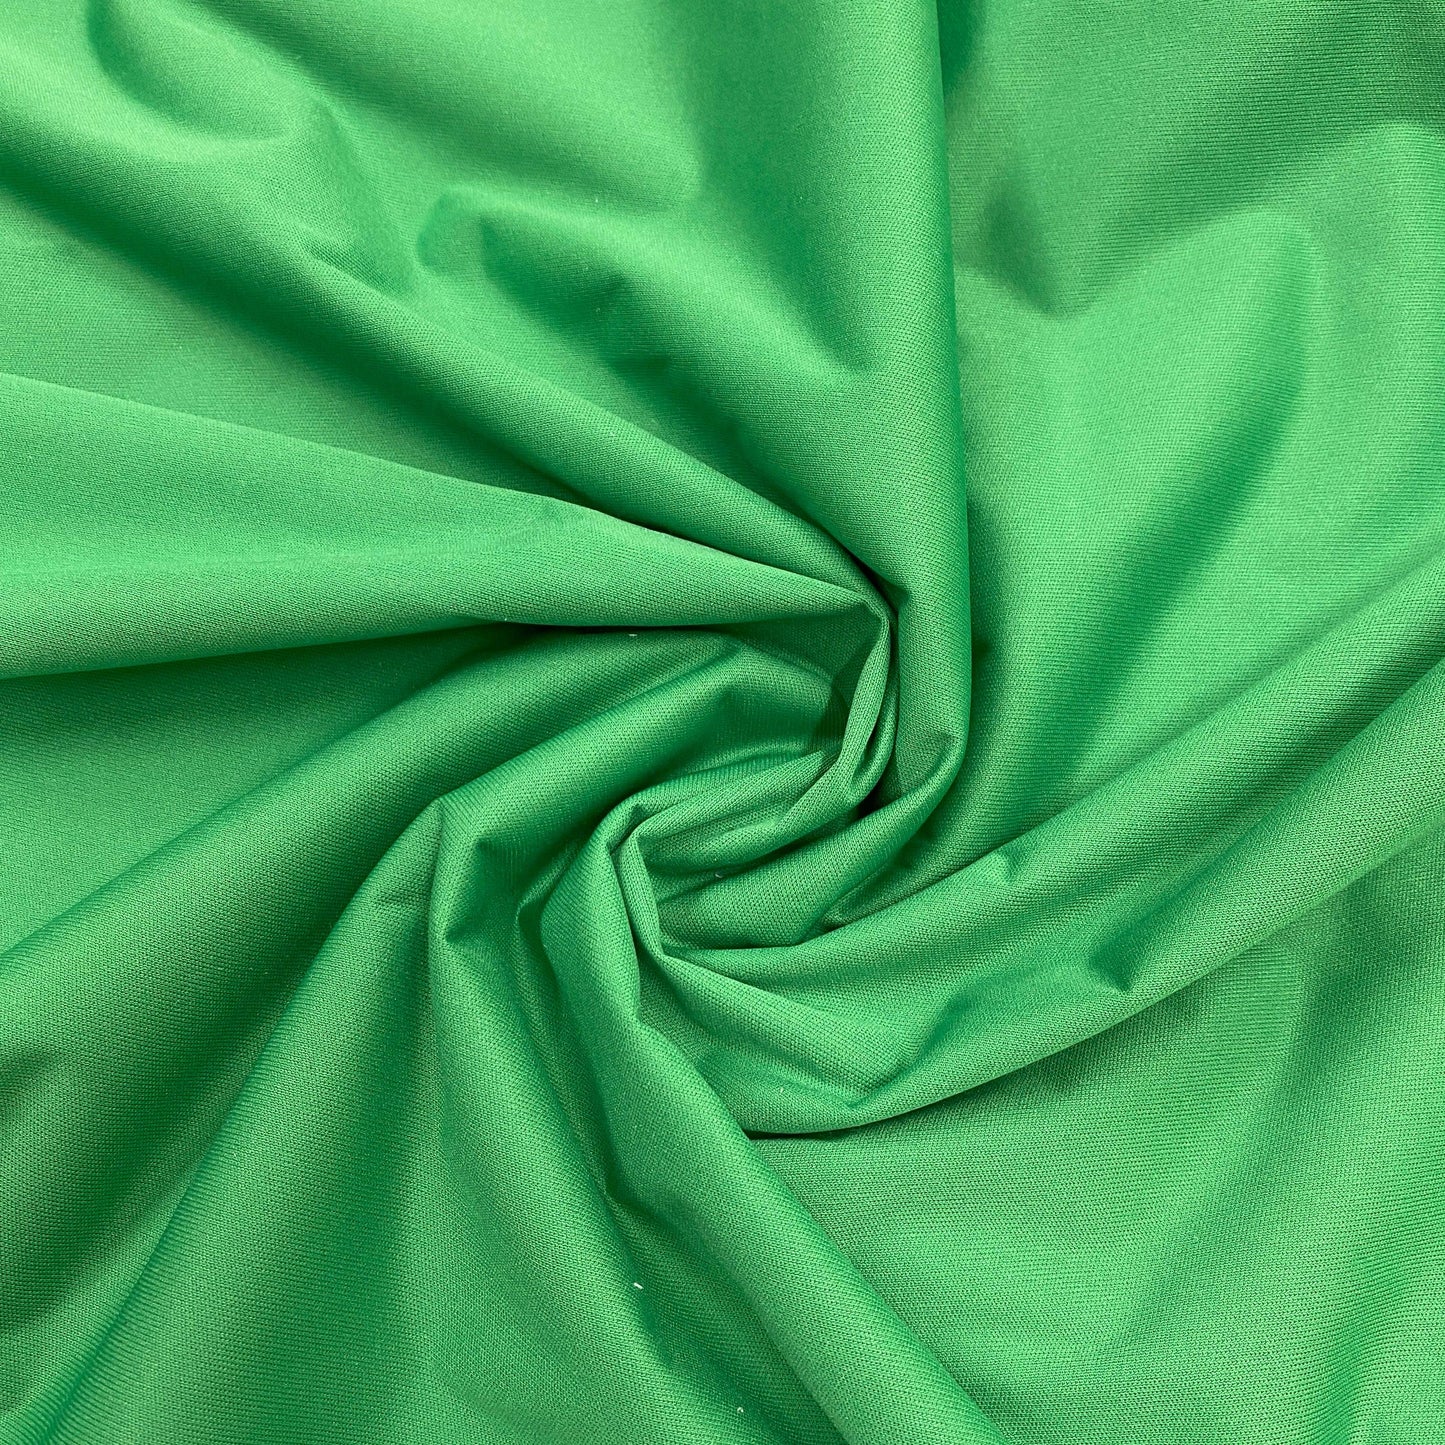 Grassy Green 1 mil PUL Fabric - Made in the USA - Nature's Fabrics